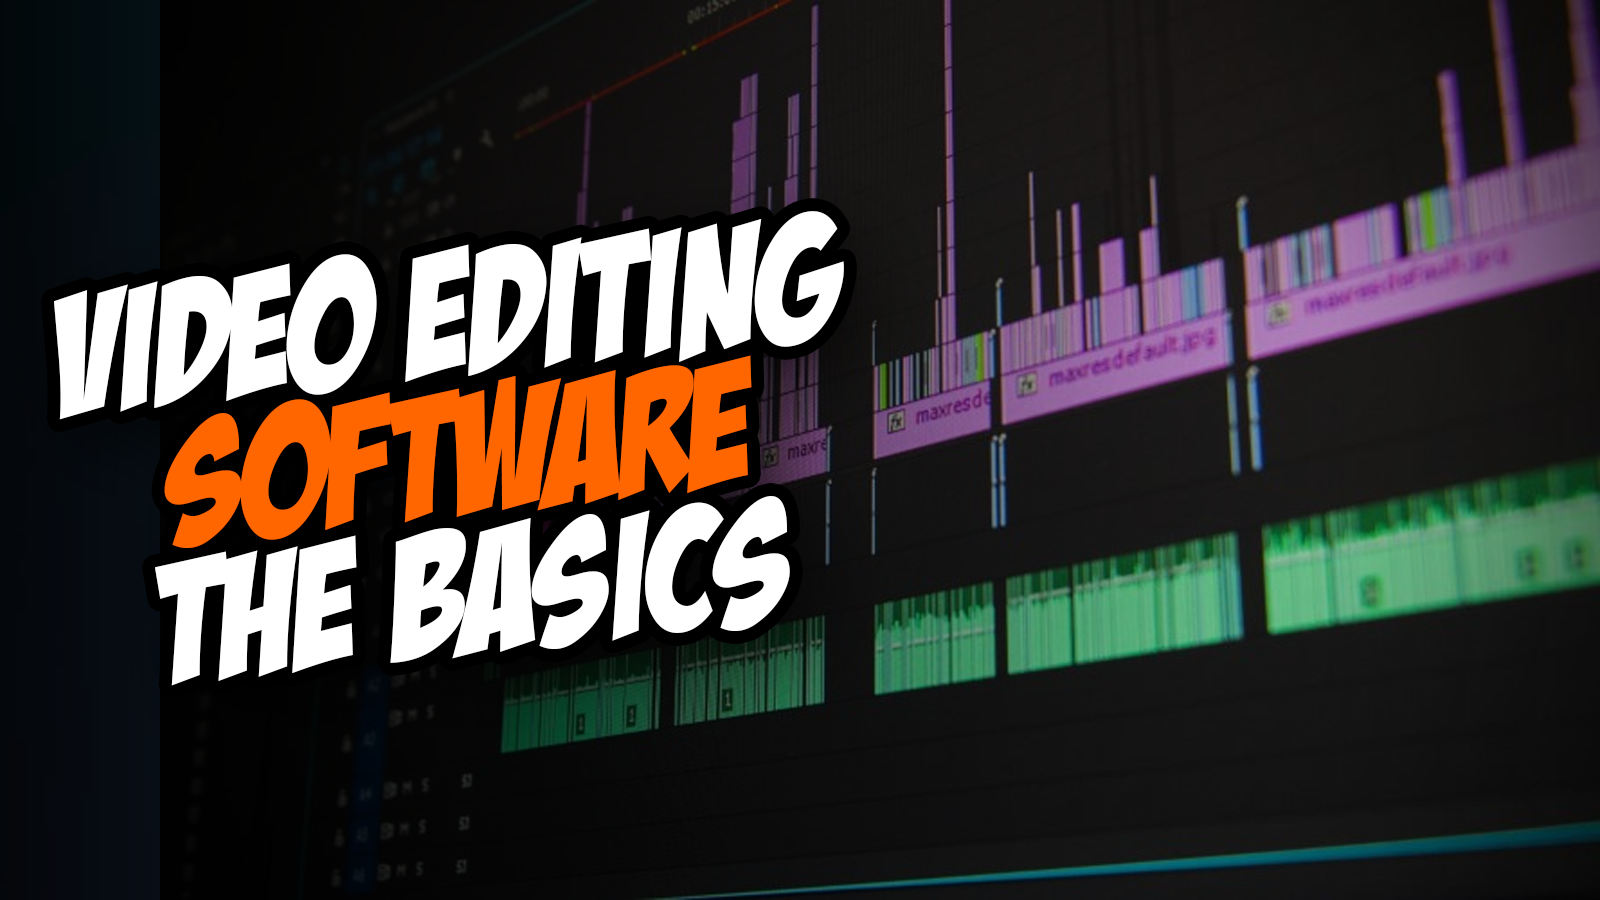 Video Editing Software for Editing Gaming Contents: The Beginner Level of Editing 